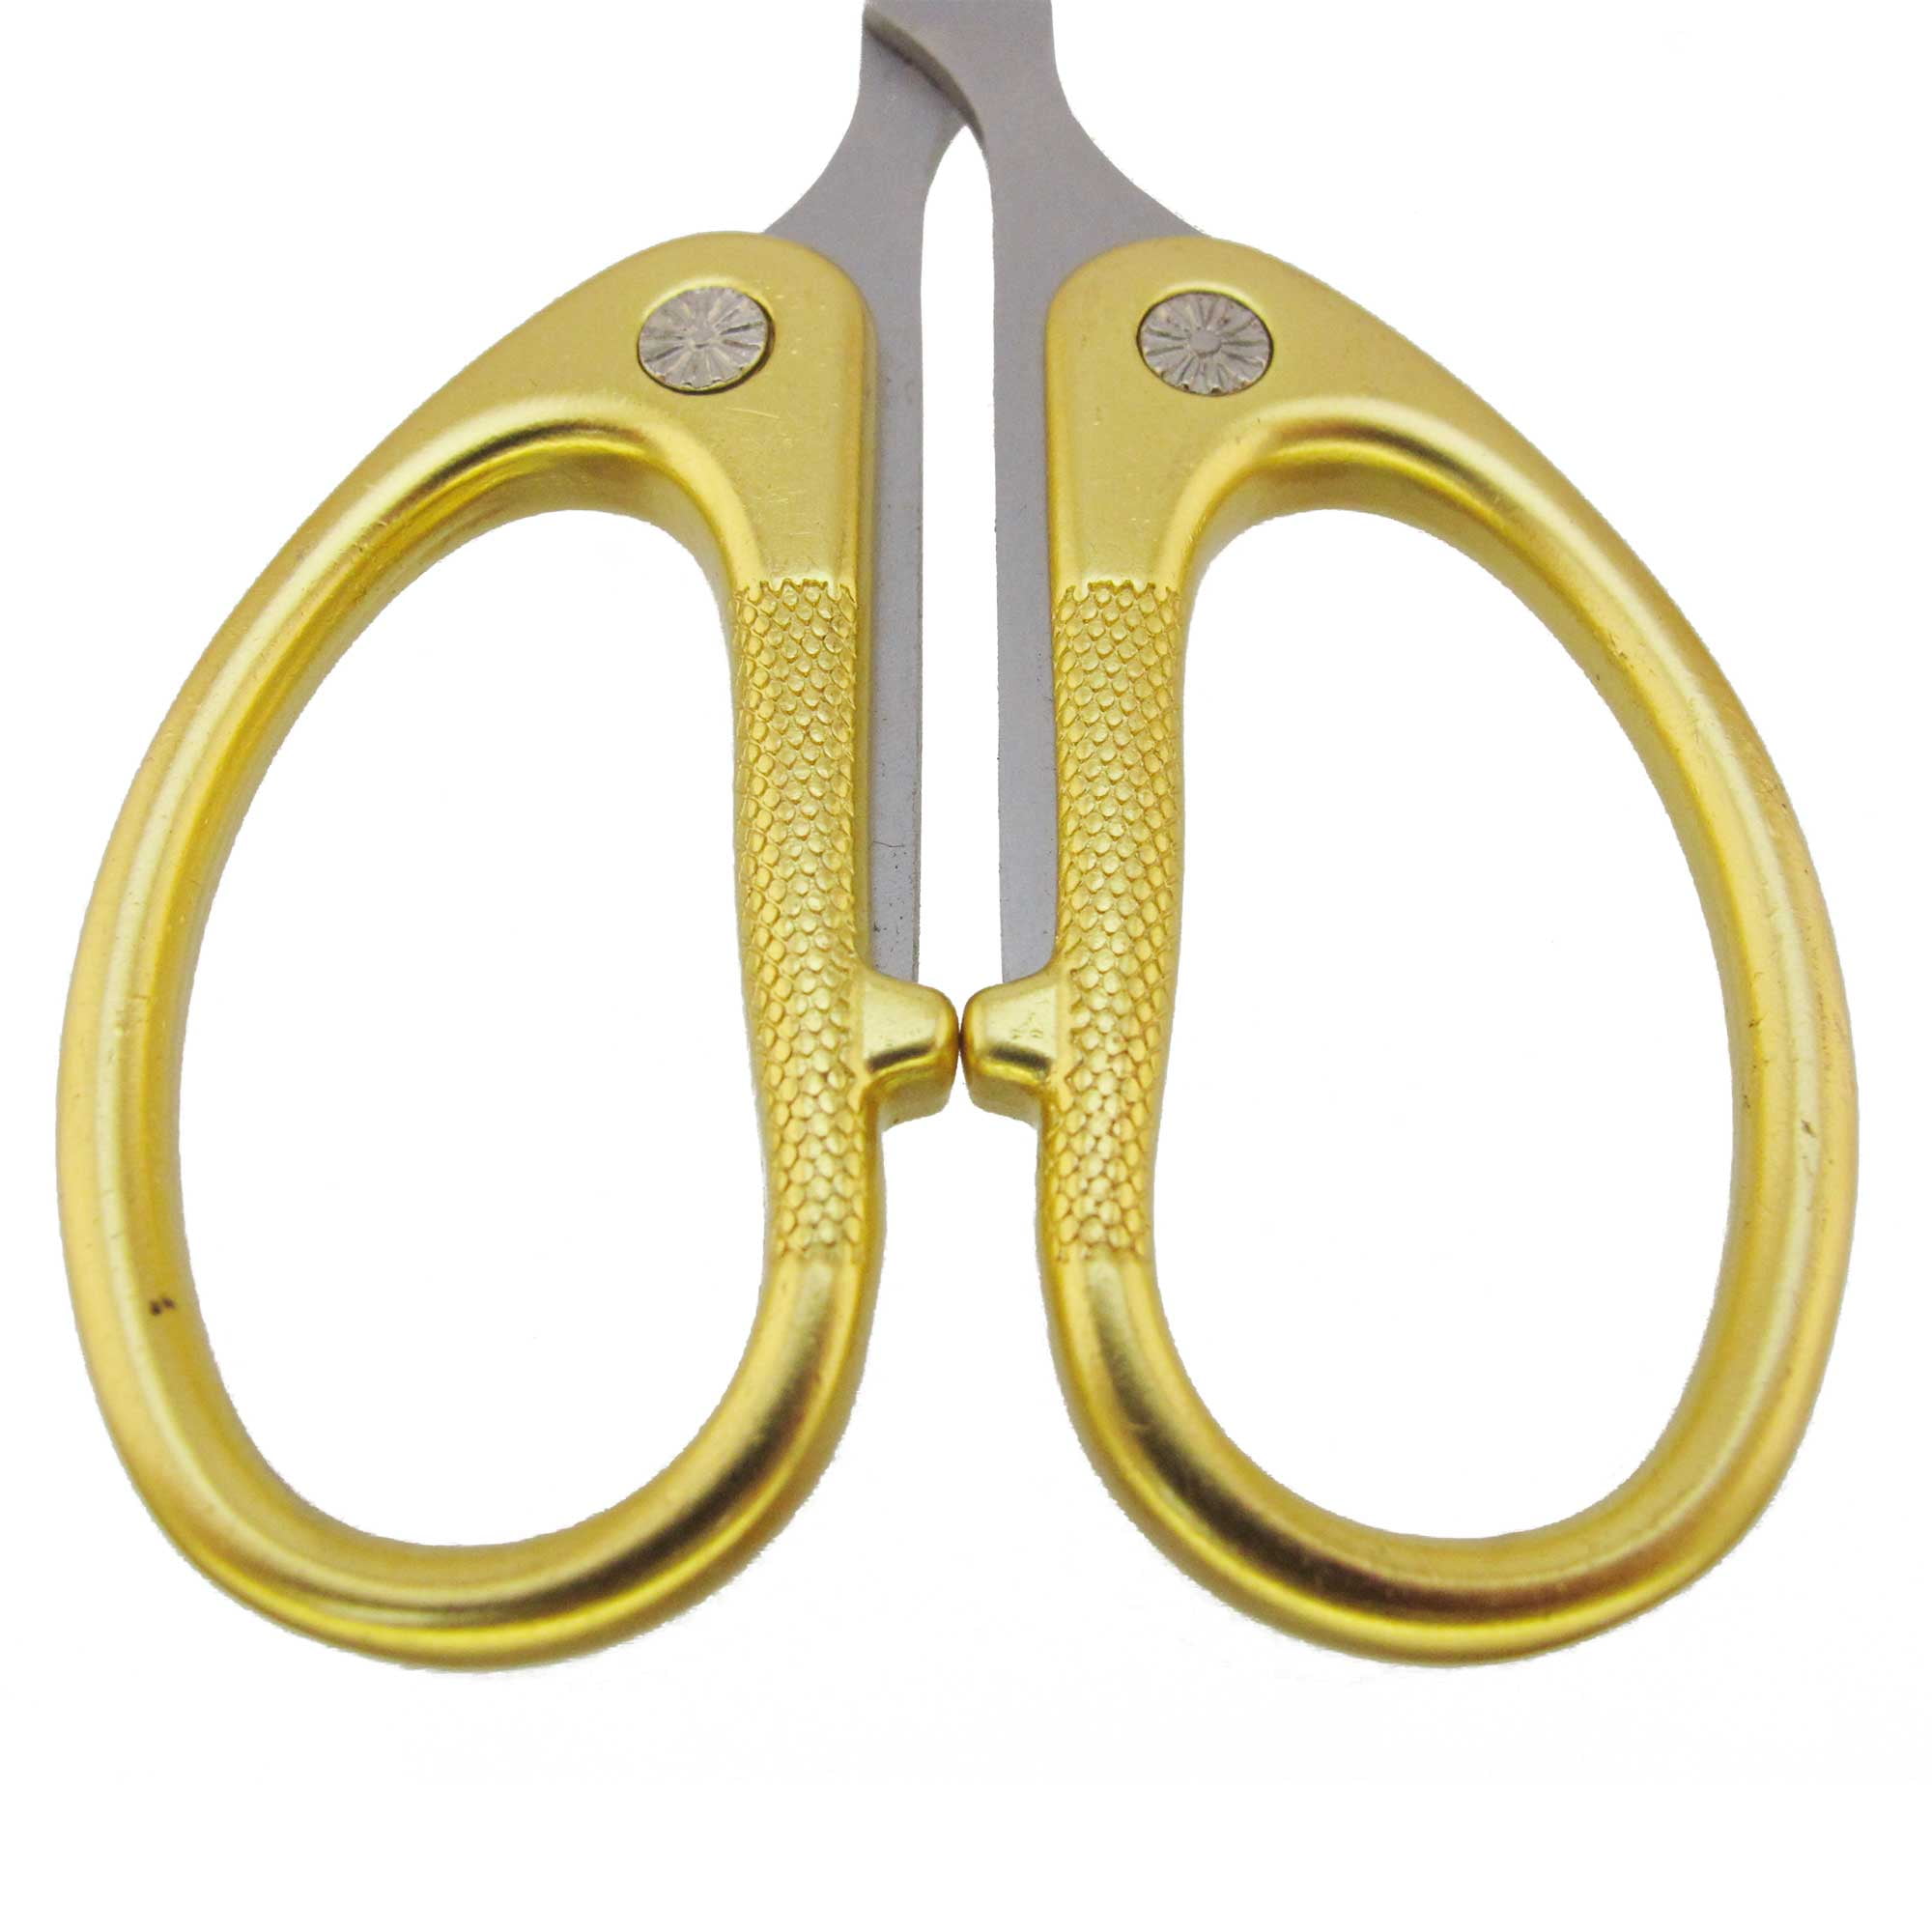 HALO FORGE Small Embroidery Scissors: Small Sharp Scissors, Little Straight  Stainless Steel Pointed Tip Precision Cutting Details Thread Yarn for